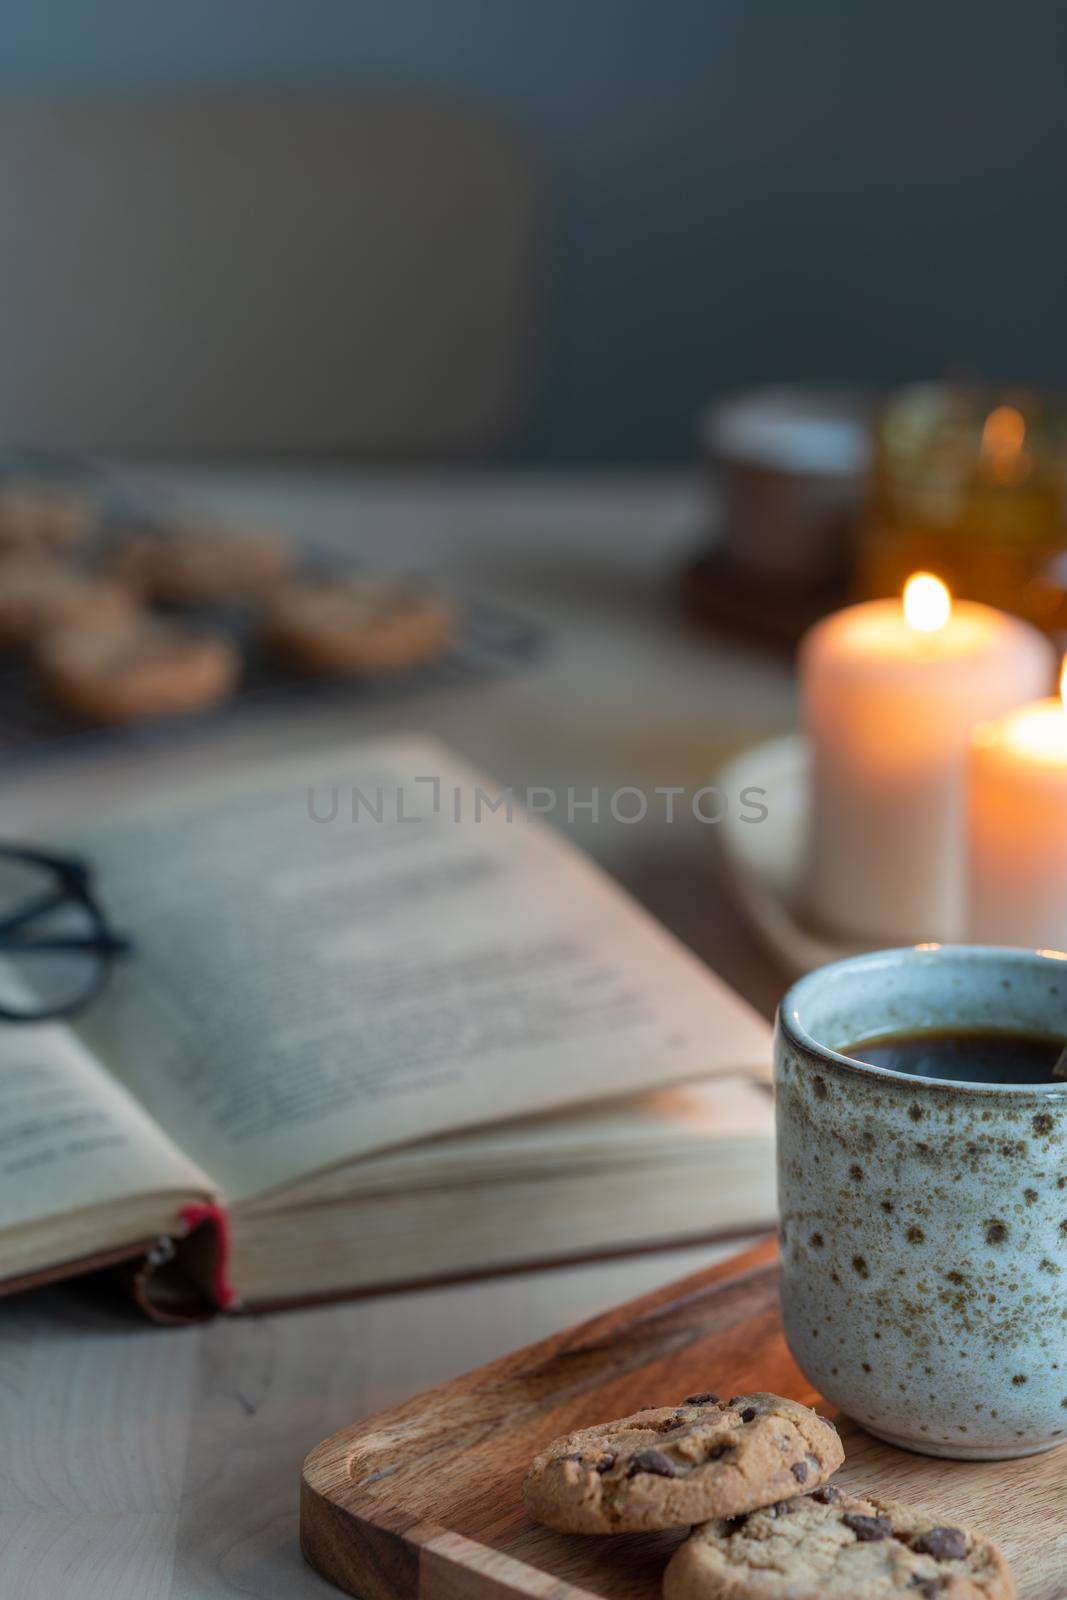 Reading book on cozy winter evening with candles, tea and cookies. by NataBene